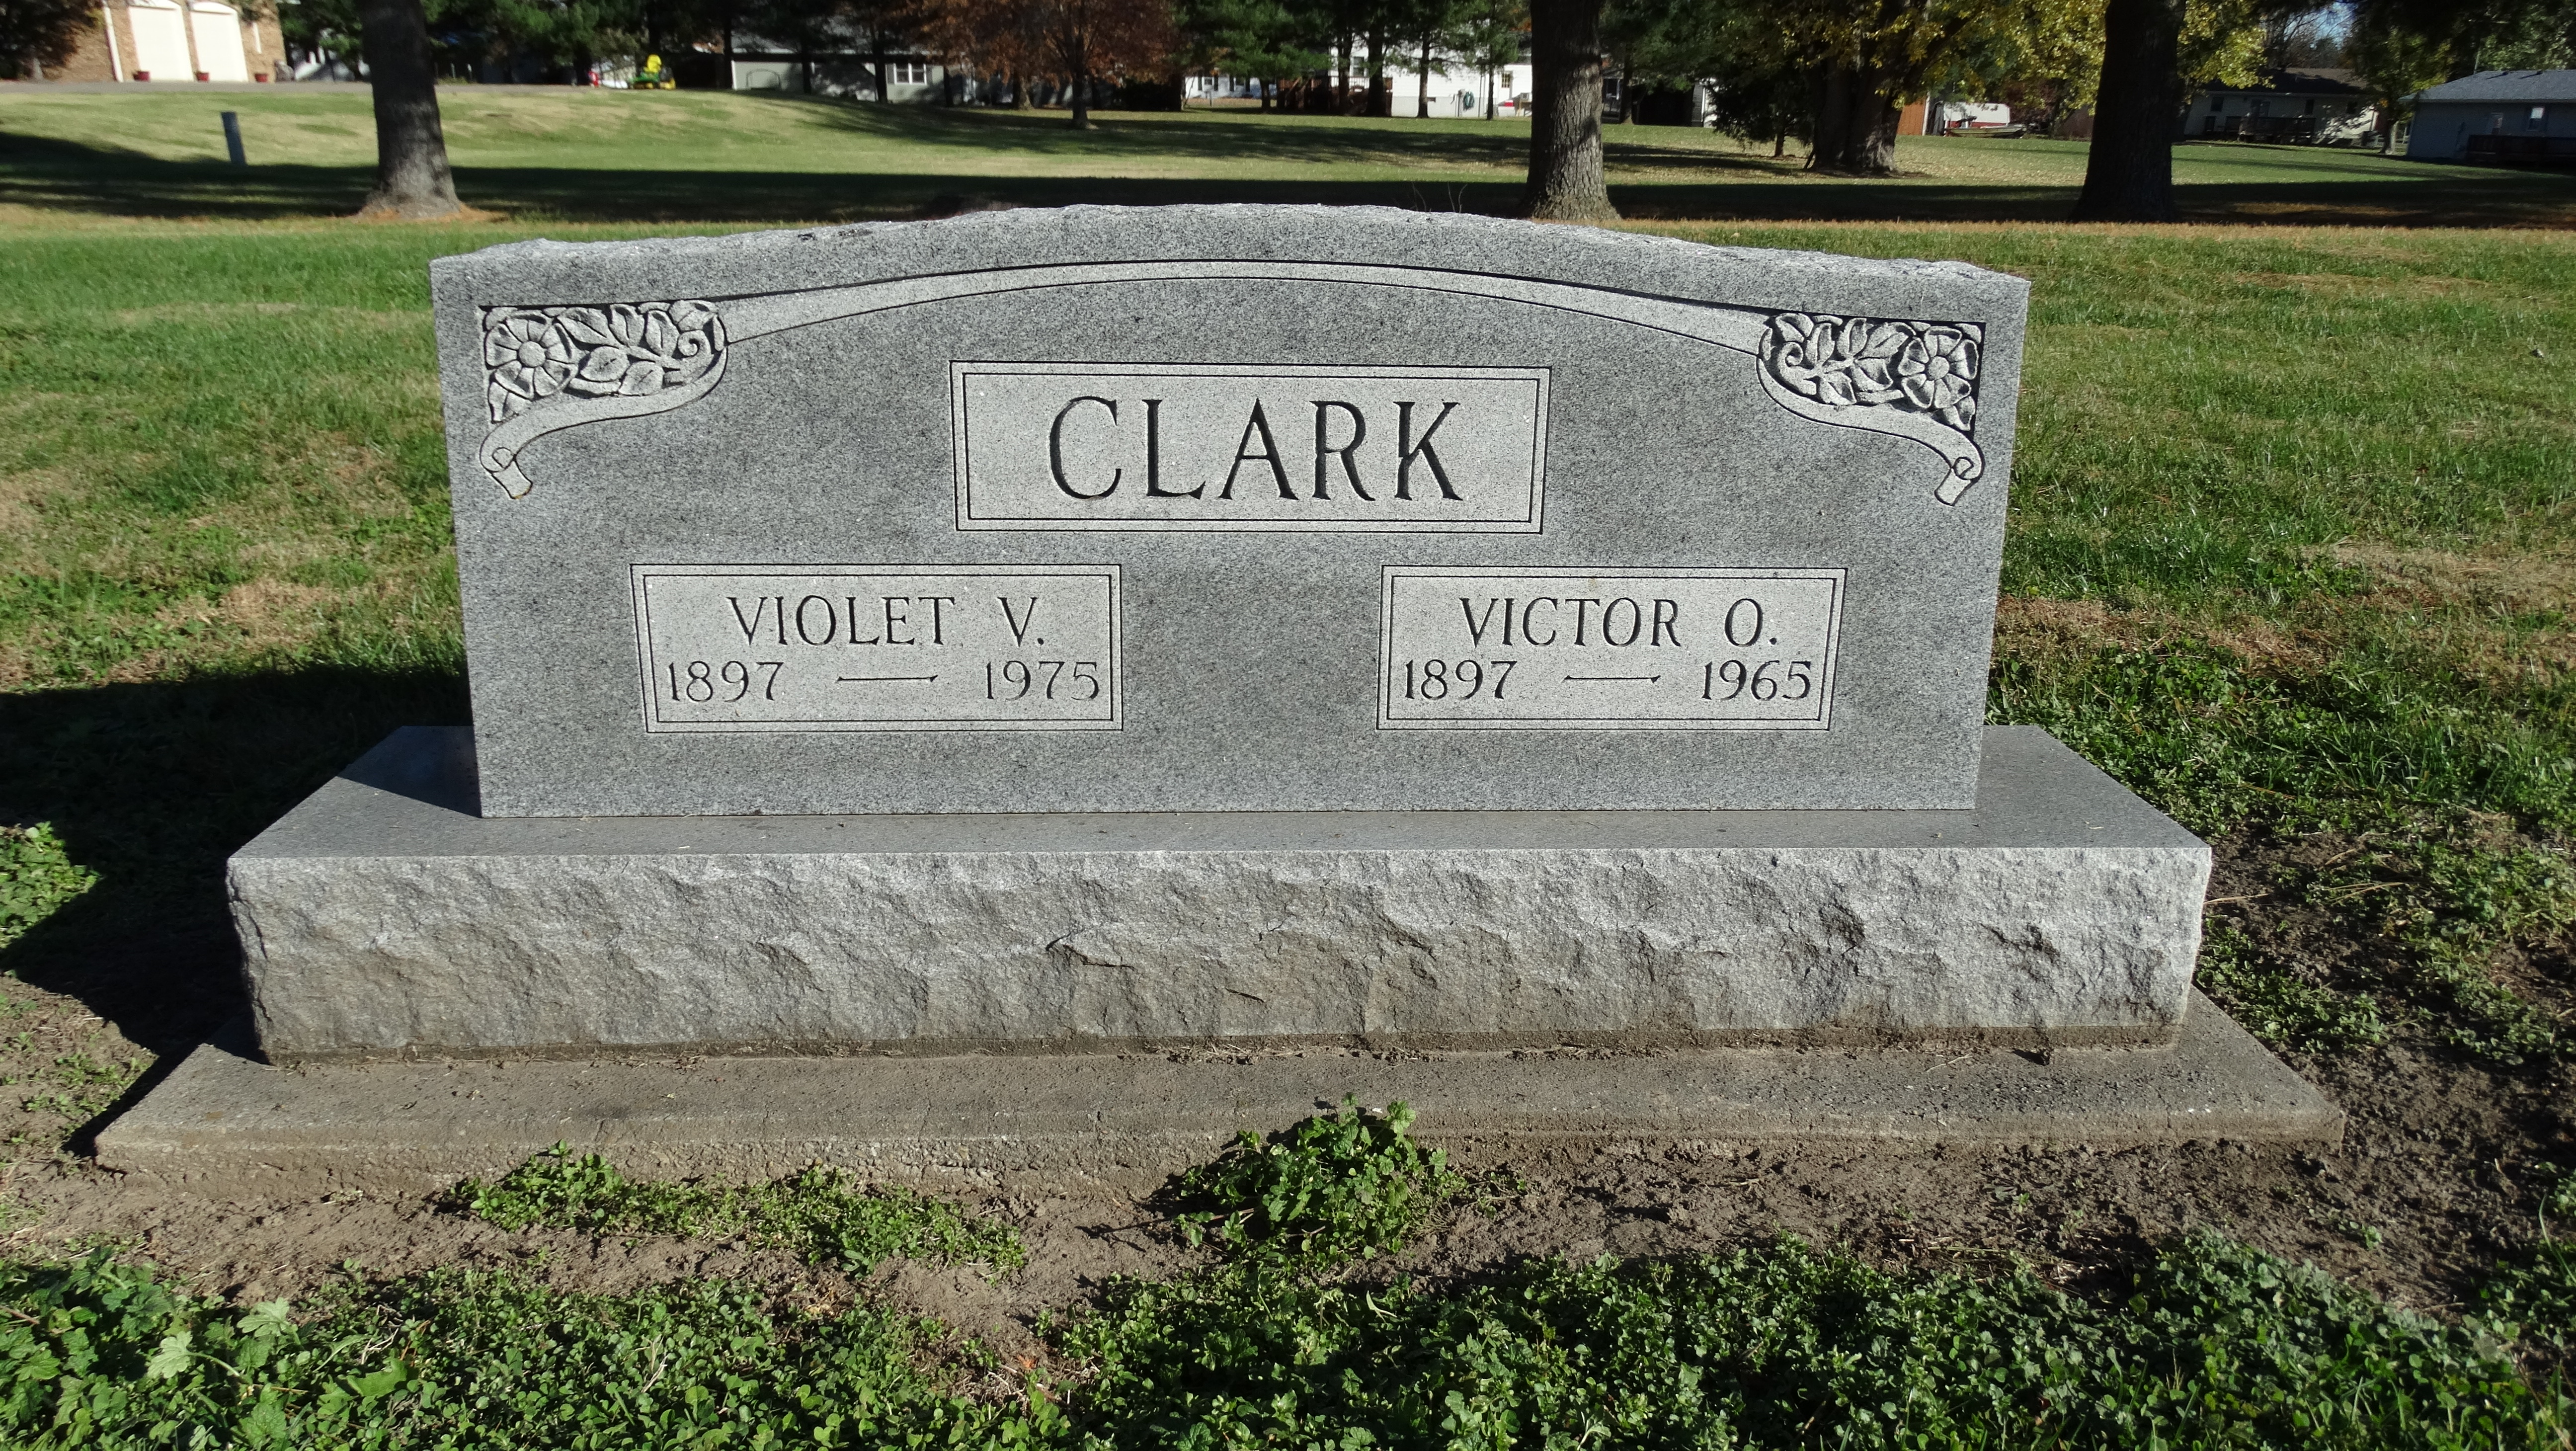 Victor and Violet Clark Headstone, image by Alan Clark